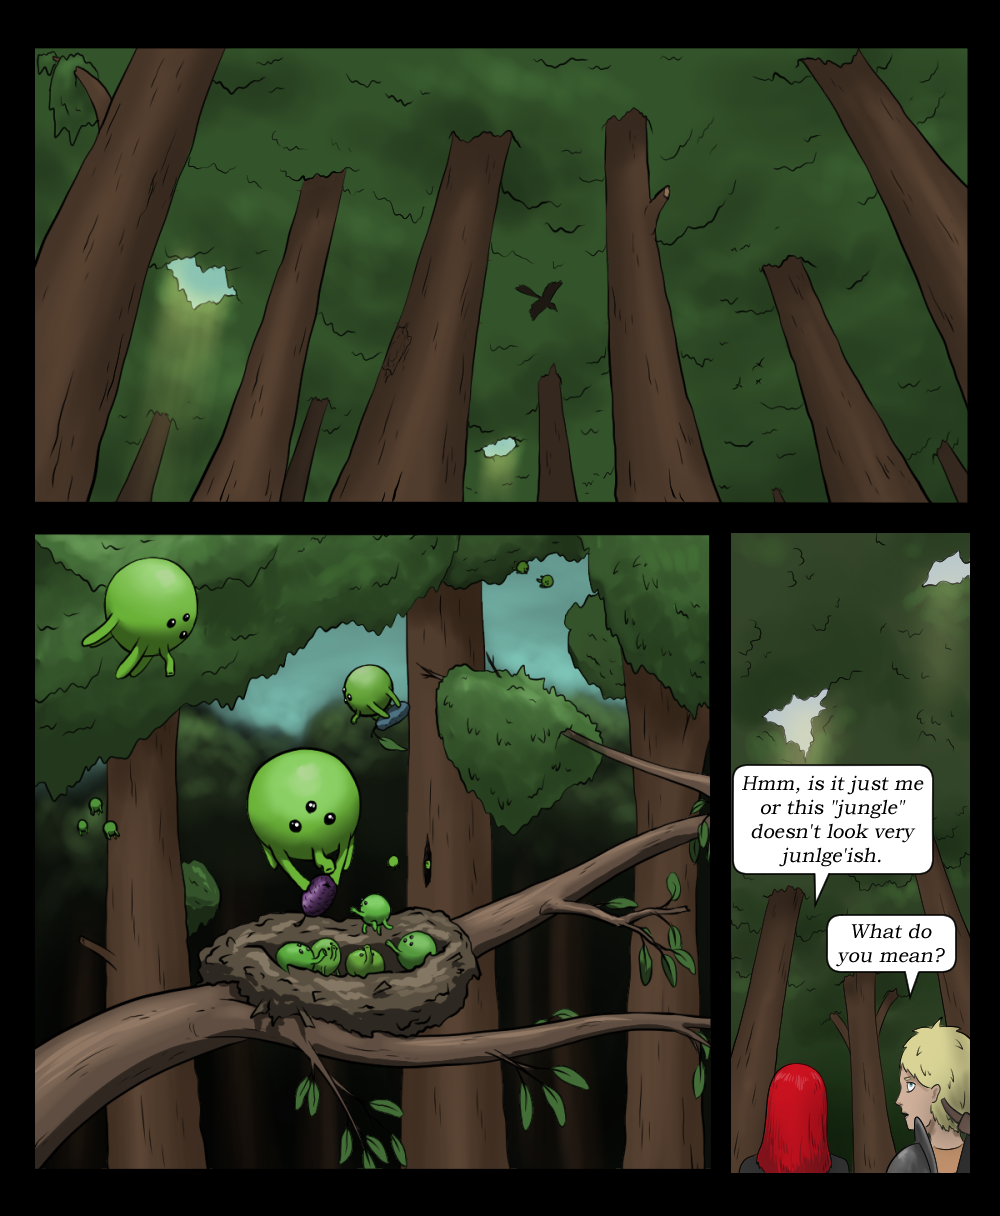 Page 17 - The wrong kind of jungle (Part 1)